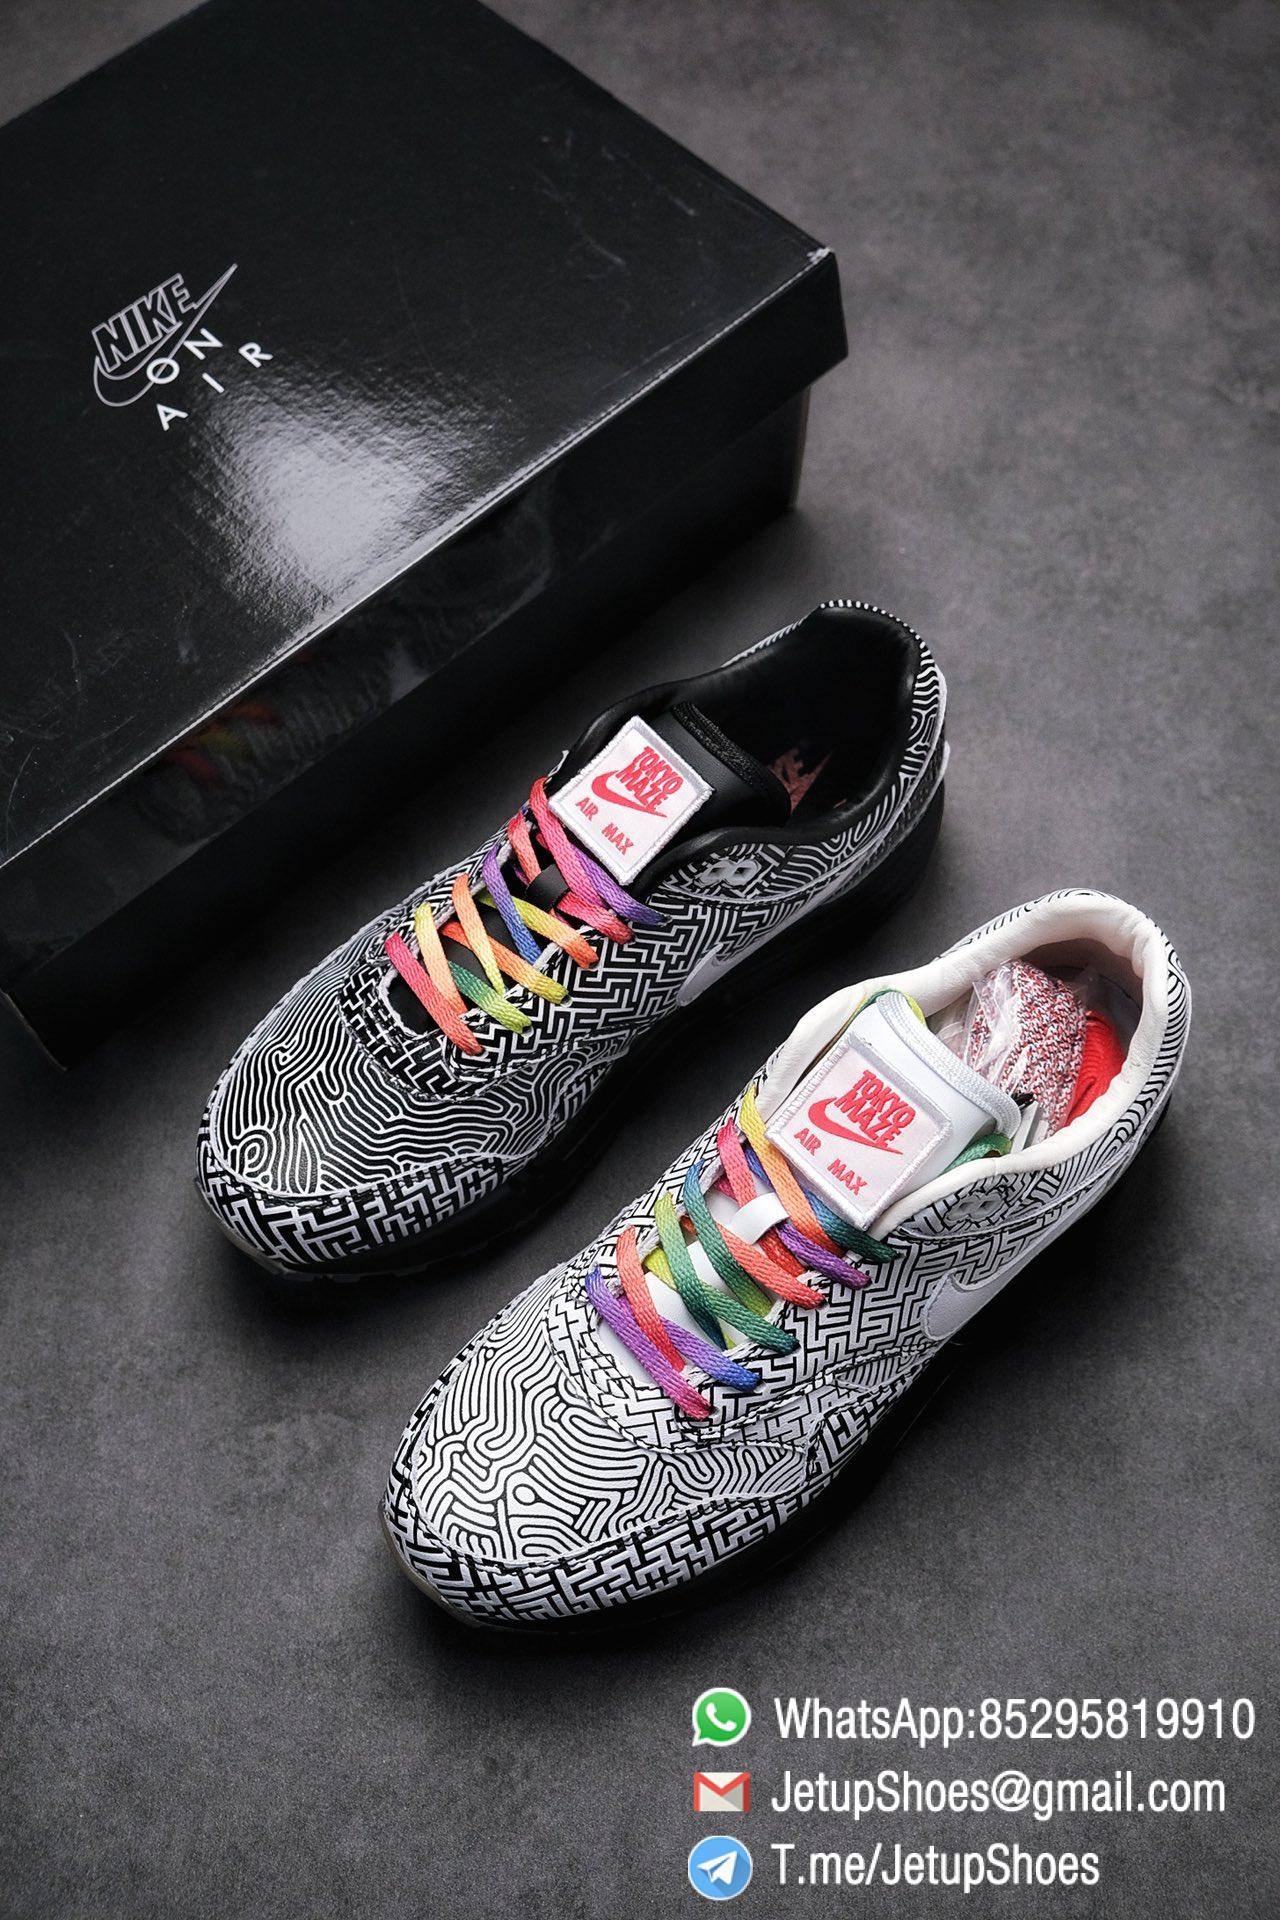 Best Replica Sneakers Nike Air Max 1 On Air Tokyo Maze Monochromatic Labyrinth Leather Upper Rainbow Colored Laces 09